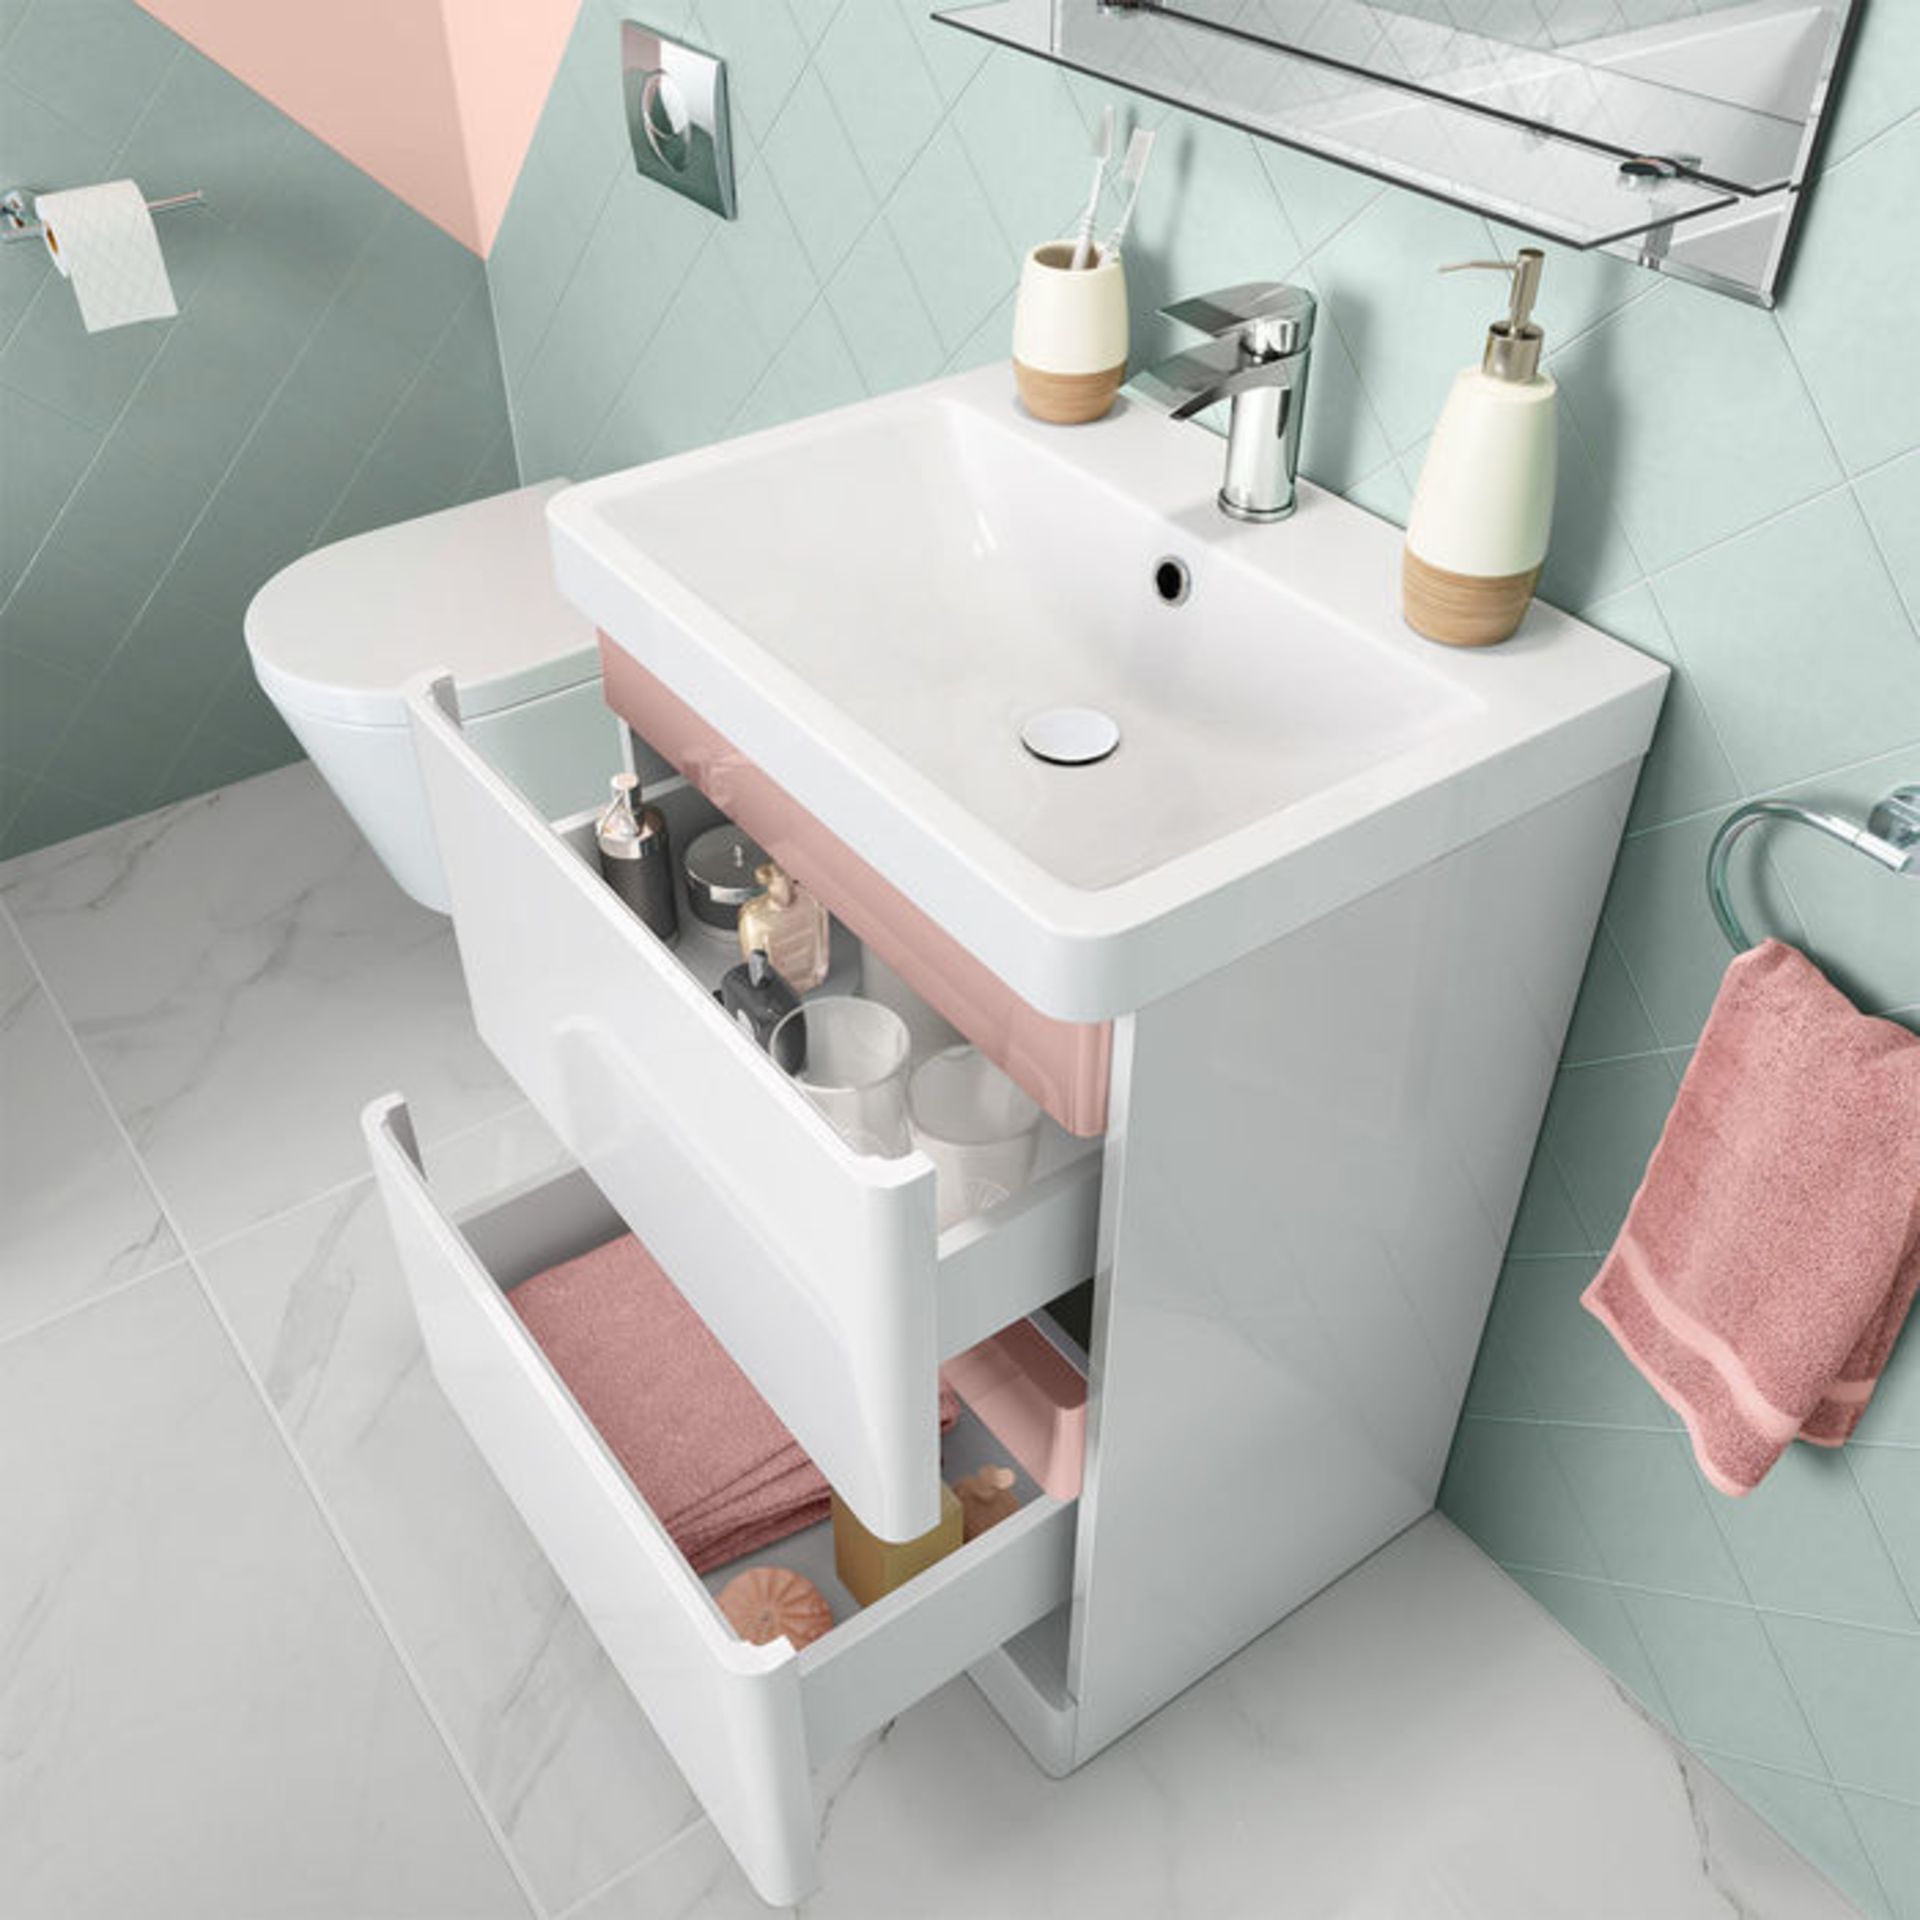 New & Boxed 600 mm Denver Floor Standing Vanity Unit - Rose Gold Edition. RRP £749.99.Comes C... - Image 2 of 3